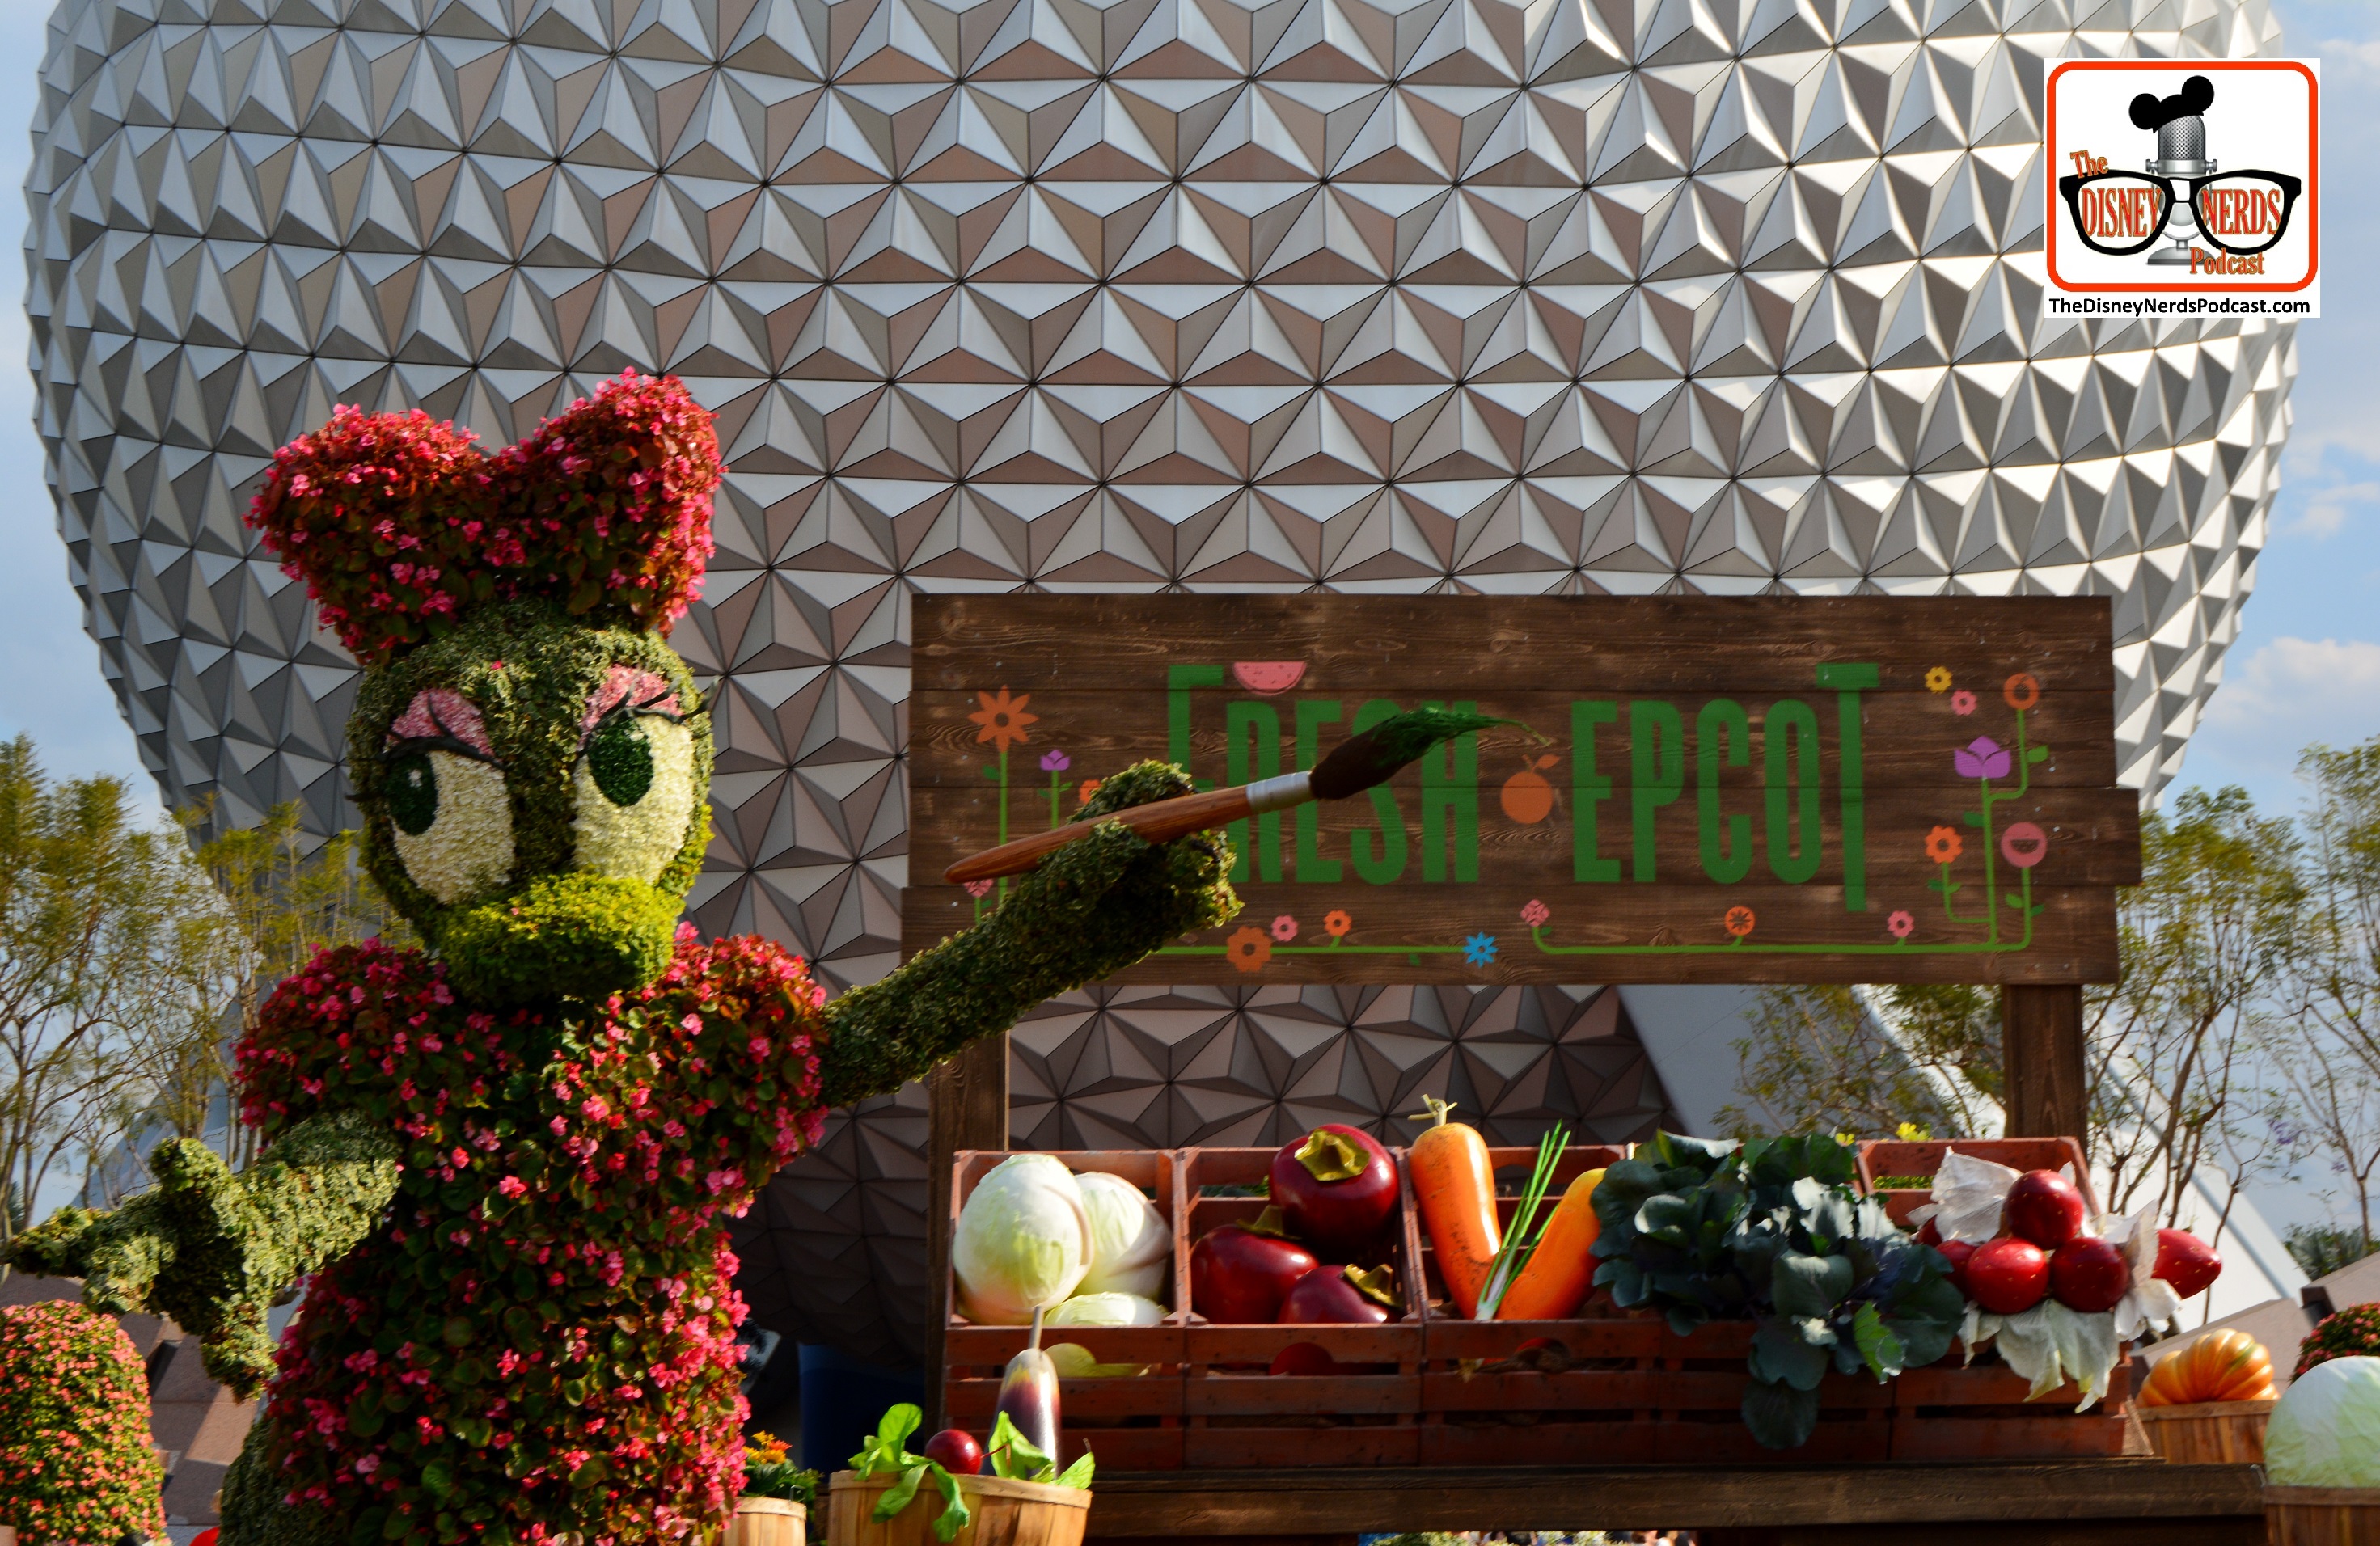 DNP April 2016 Photo Report: Epcot Flower and Garden Festival - Fresh Food, Fun & Flowers at the Main Enterance